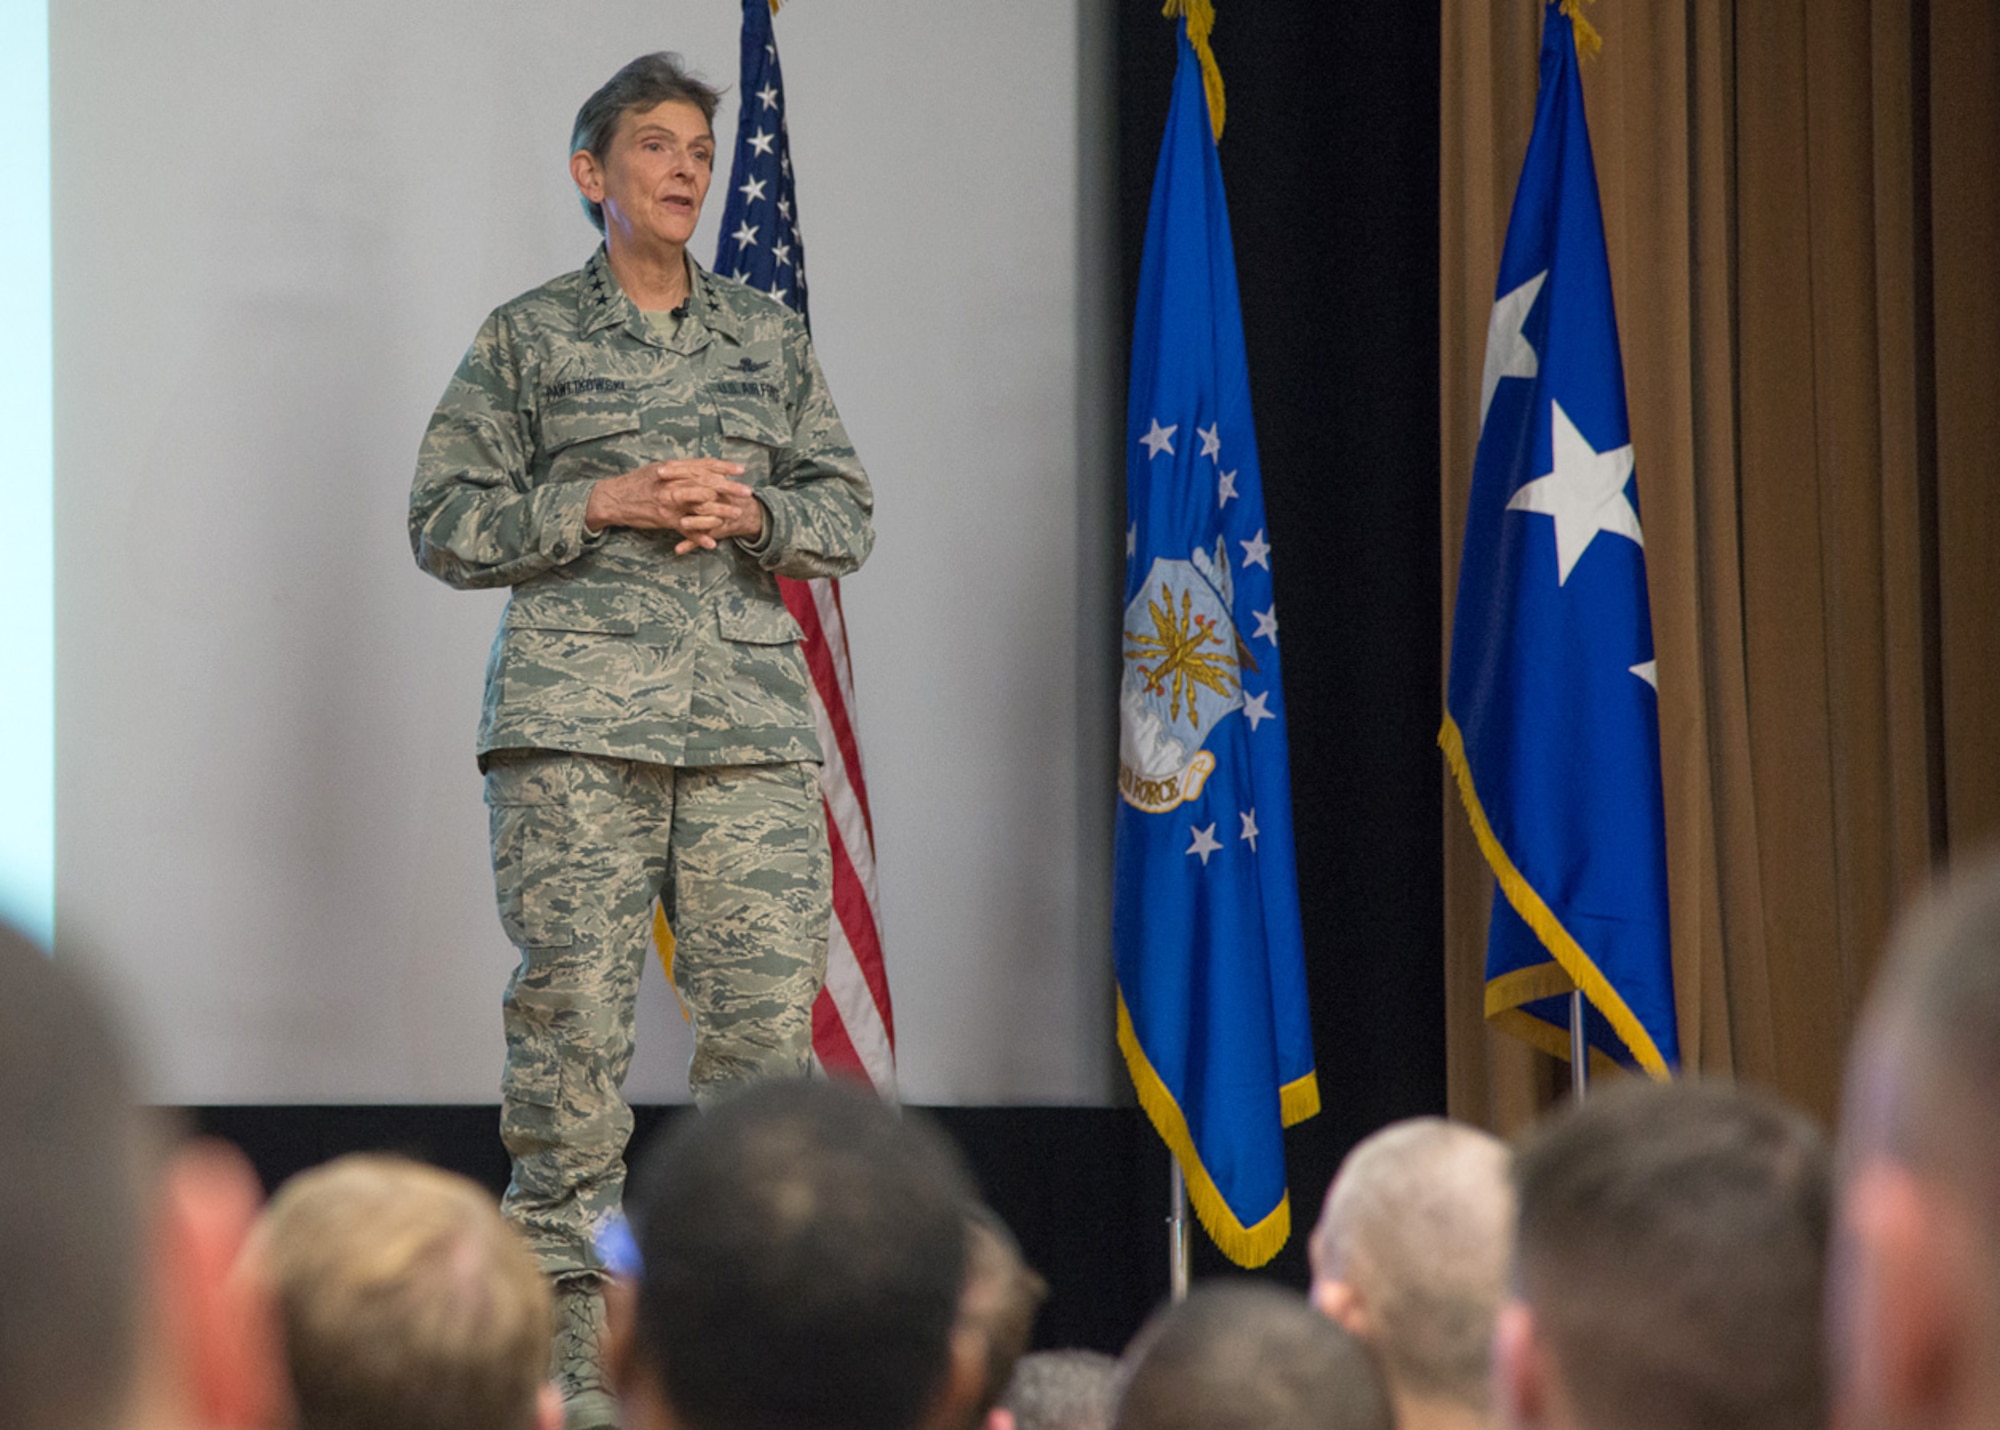 Gen. Ellen M. Pawlikowski, Air Force Materiel Command commander, speaks to employees during an all call at the base theater March 17. During the session, the general addressed the Air Force priorities as they relate to Air Force Chief of Staff Gen. David L. Goldfein’s three focus areas and the command’s strategic plan, goals and objectives. (U.S. Air Force photo by Mark Herlihy)